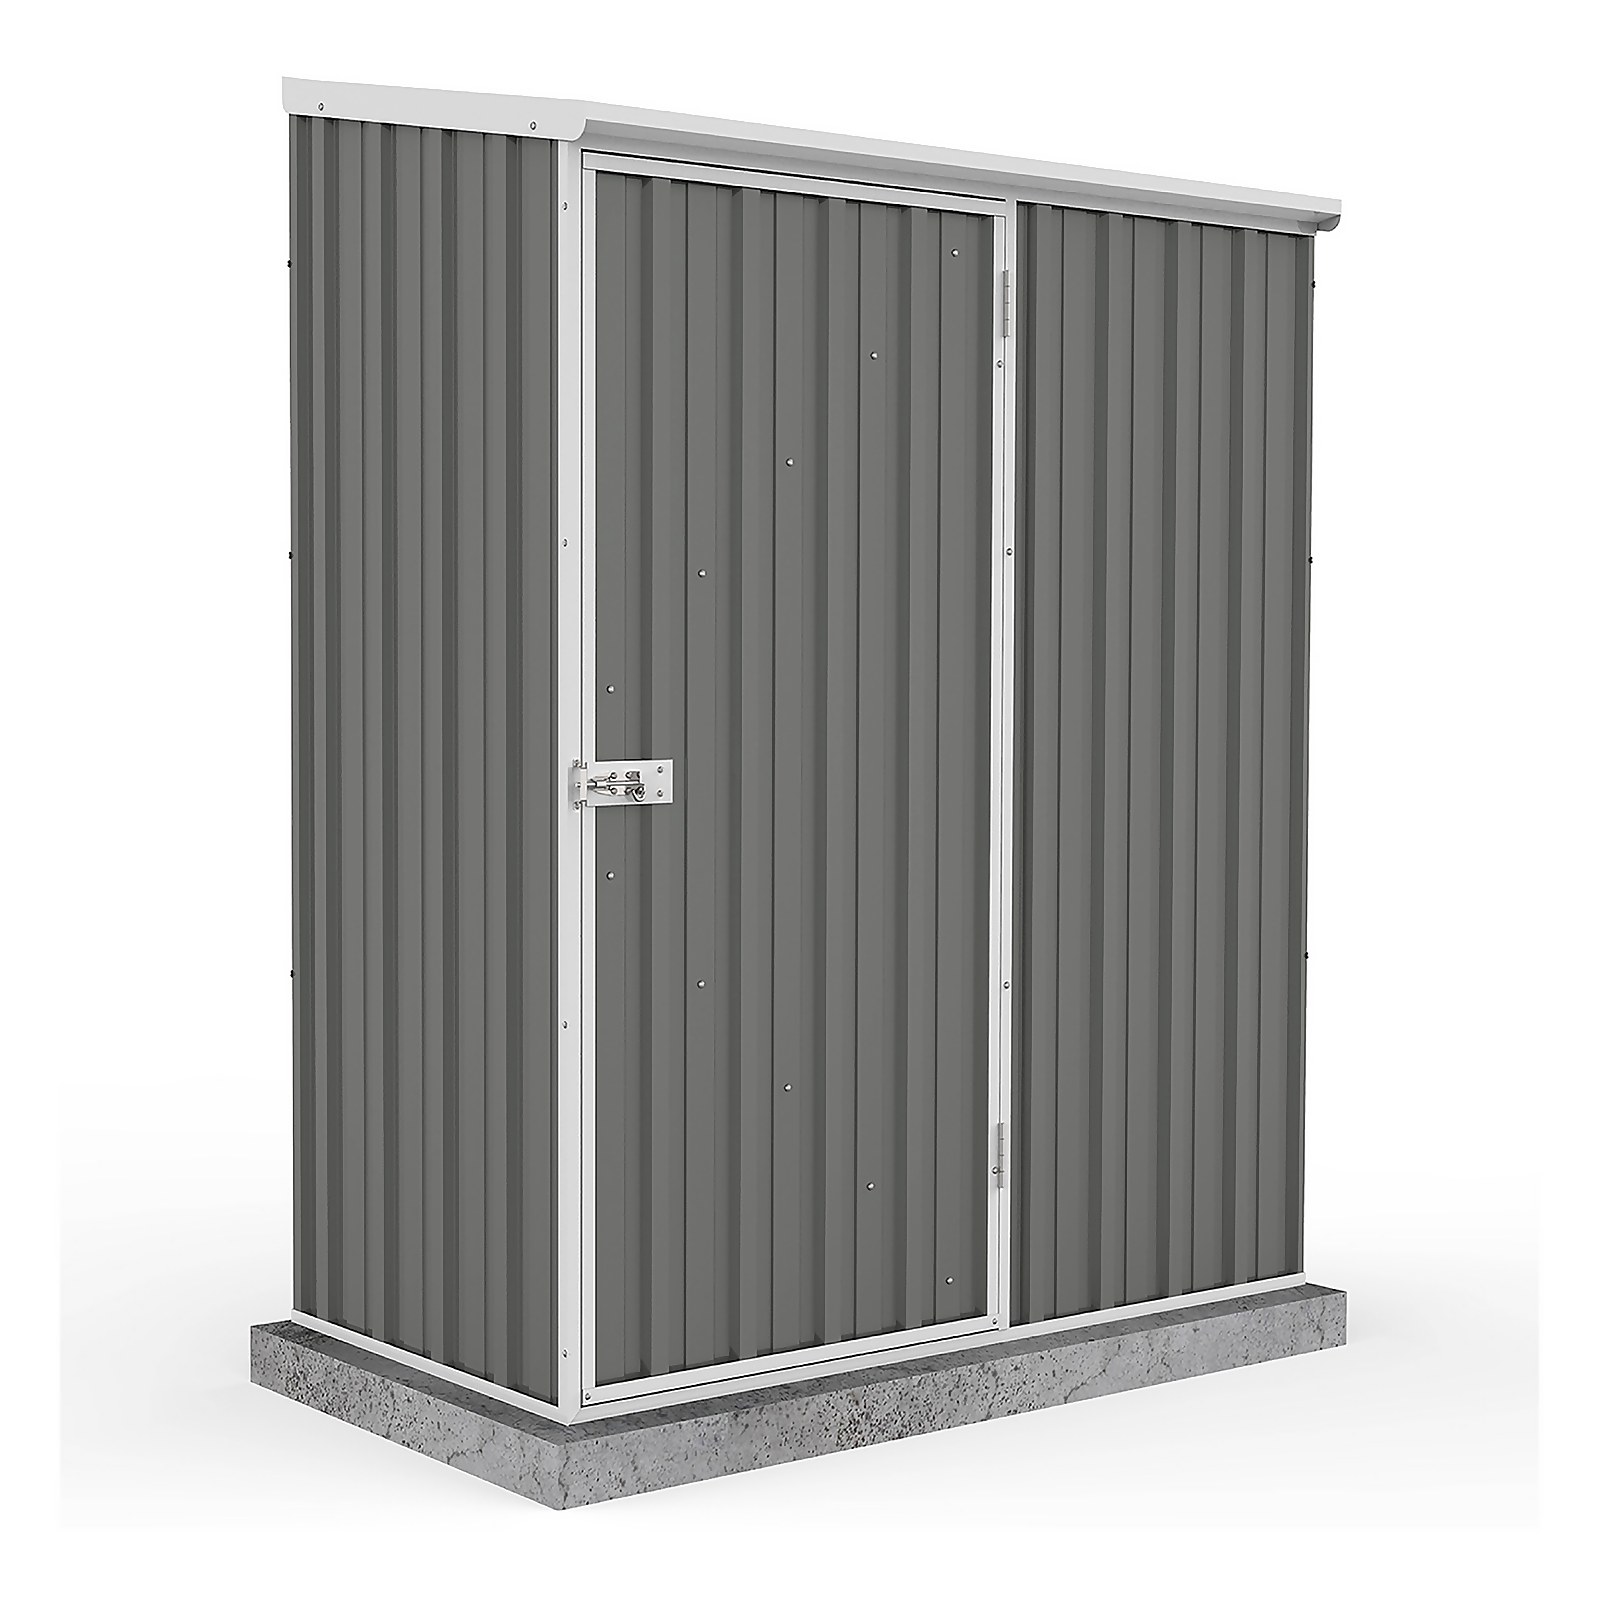 Absco 5 x 3ft Space Saver Metal Pent Shed - Grey